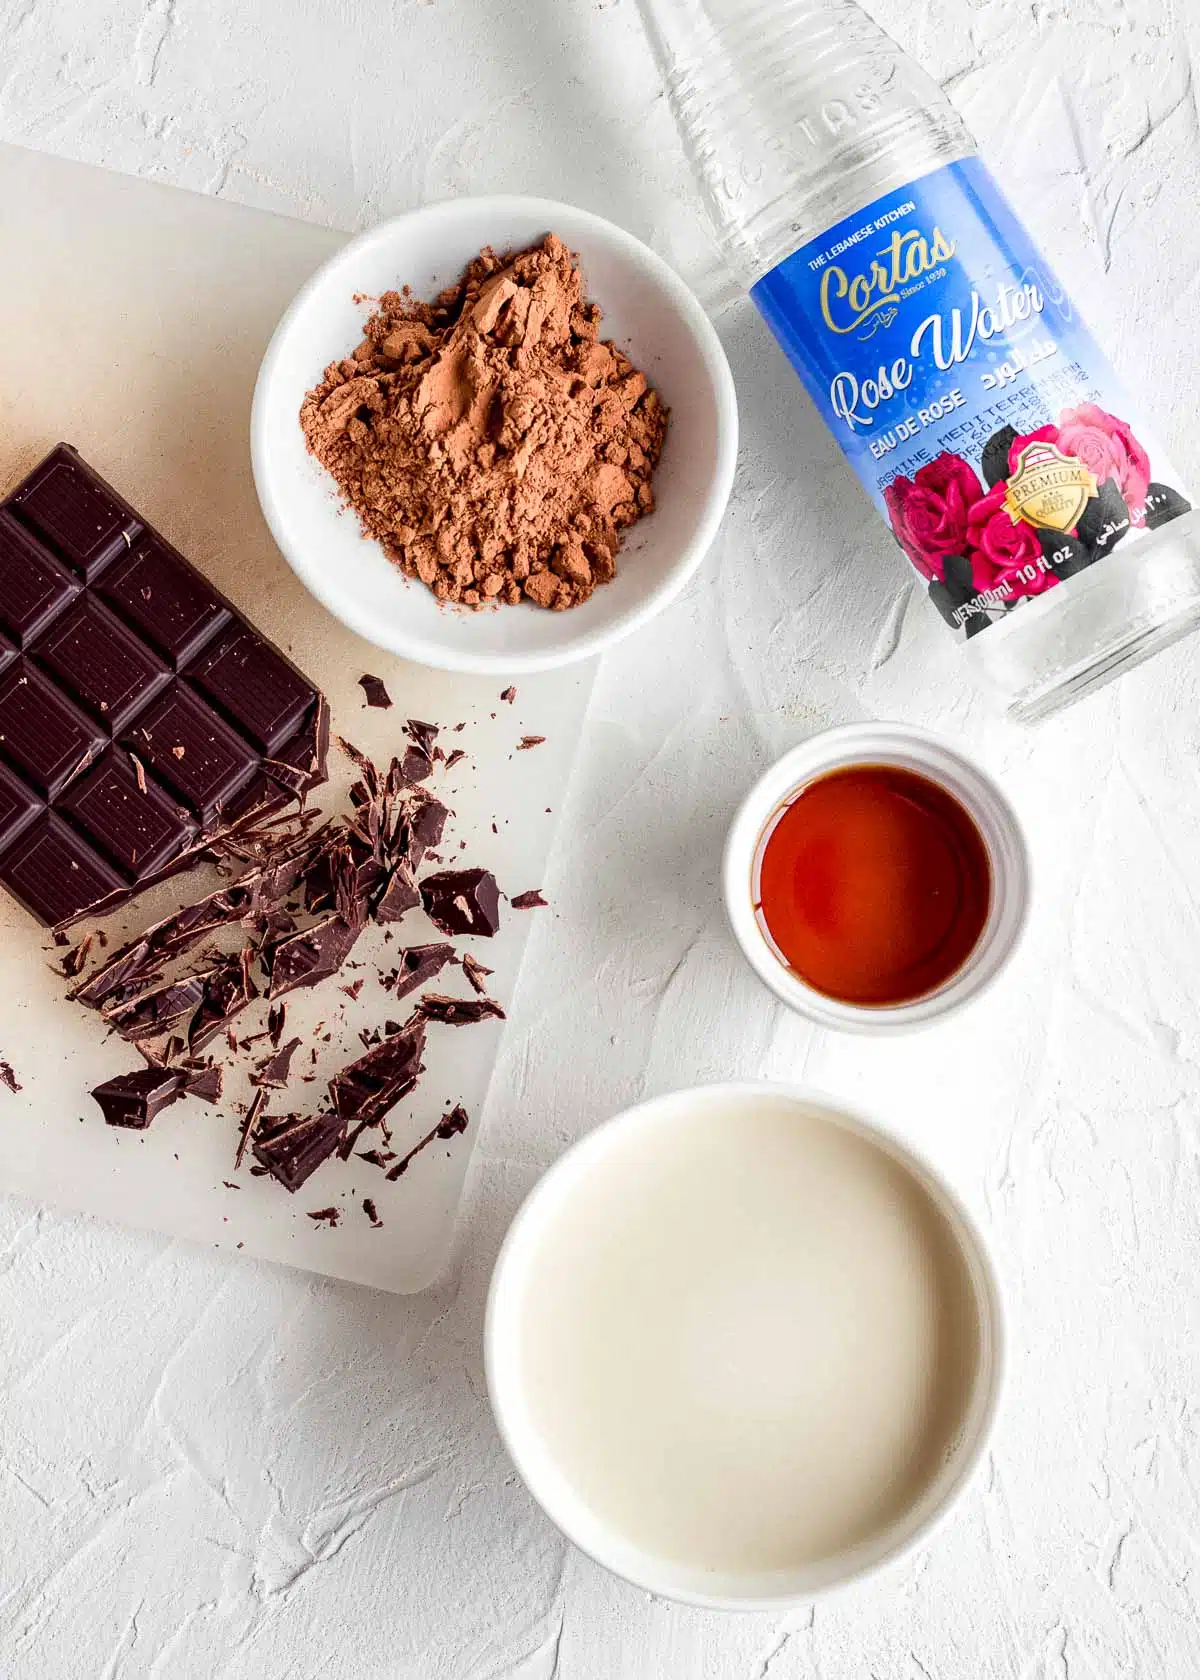 Ingredients to make rose hot chocolate: dark chocolate, cocoa powder, rose water, maple syrup and milk.